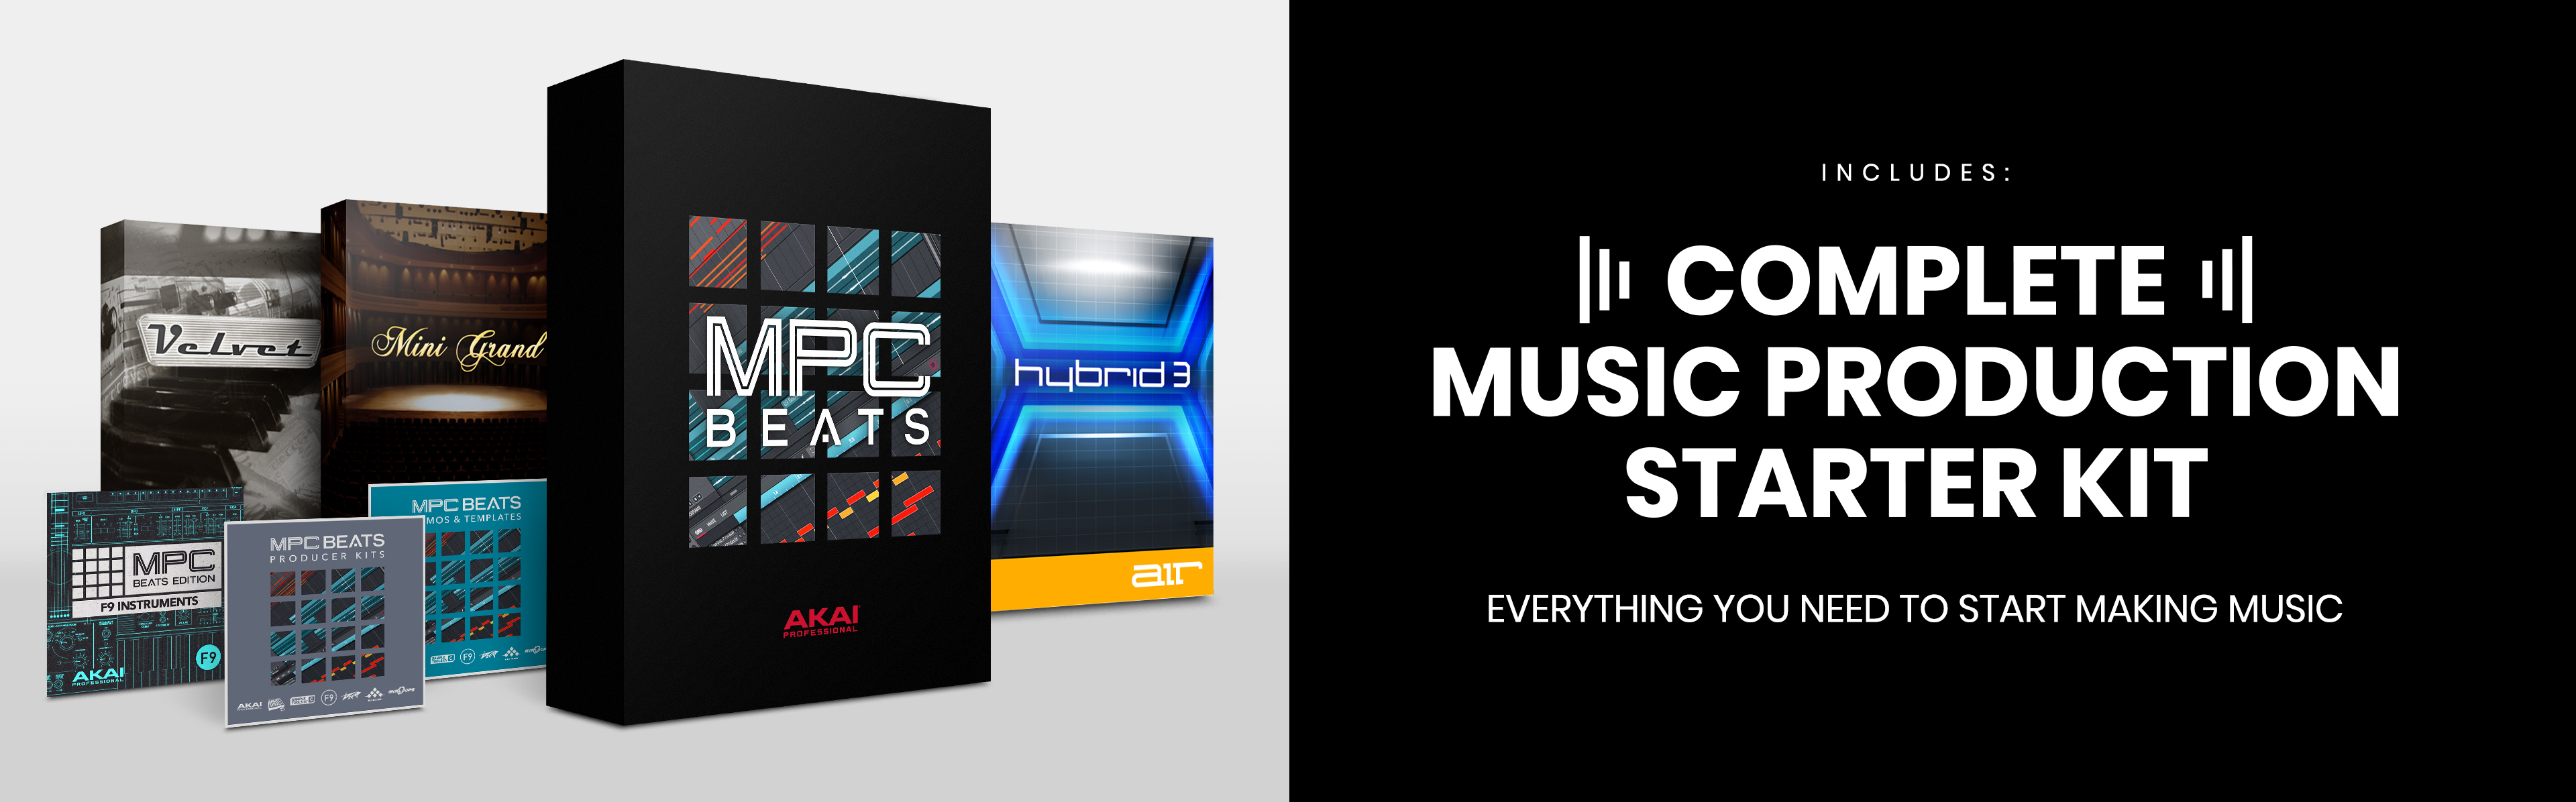 Complete music production software package to make beats